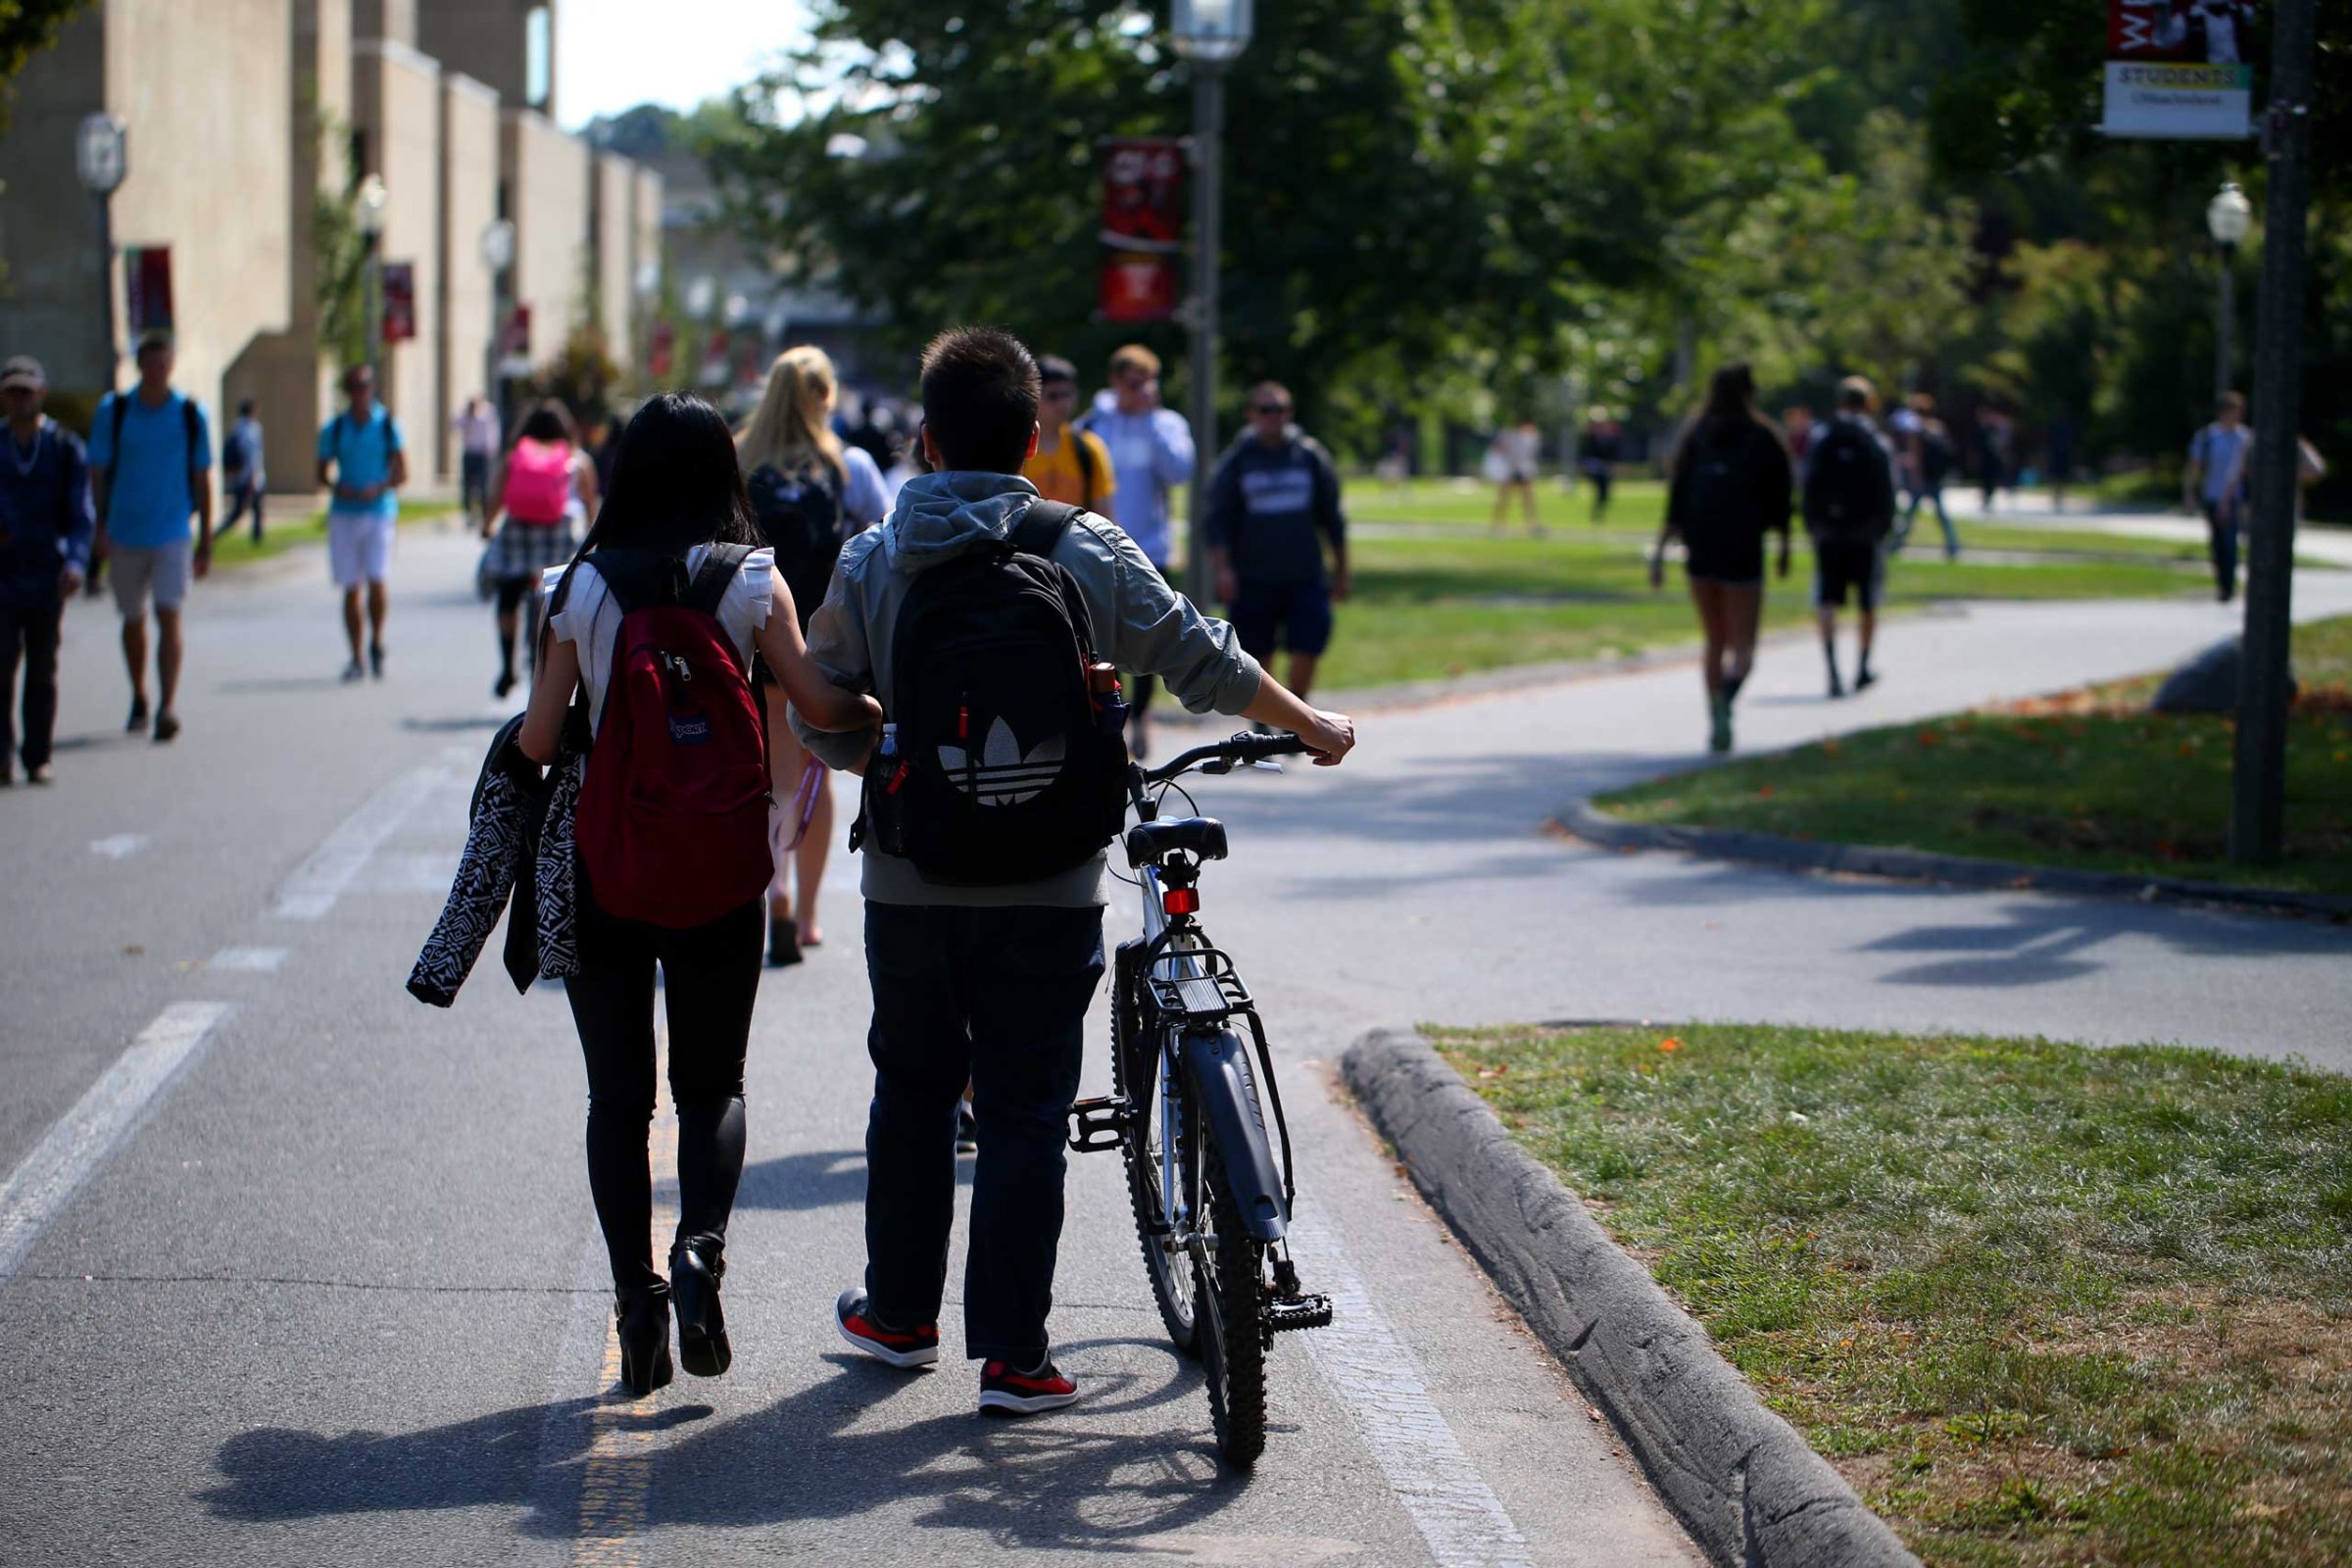 Students on the campus of UMass Amherst in 2014.